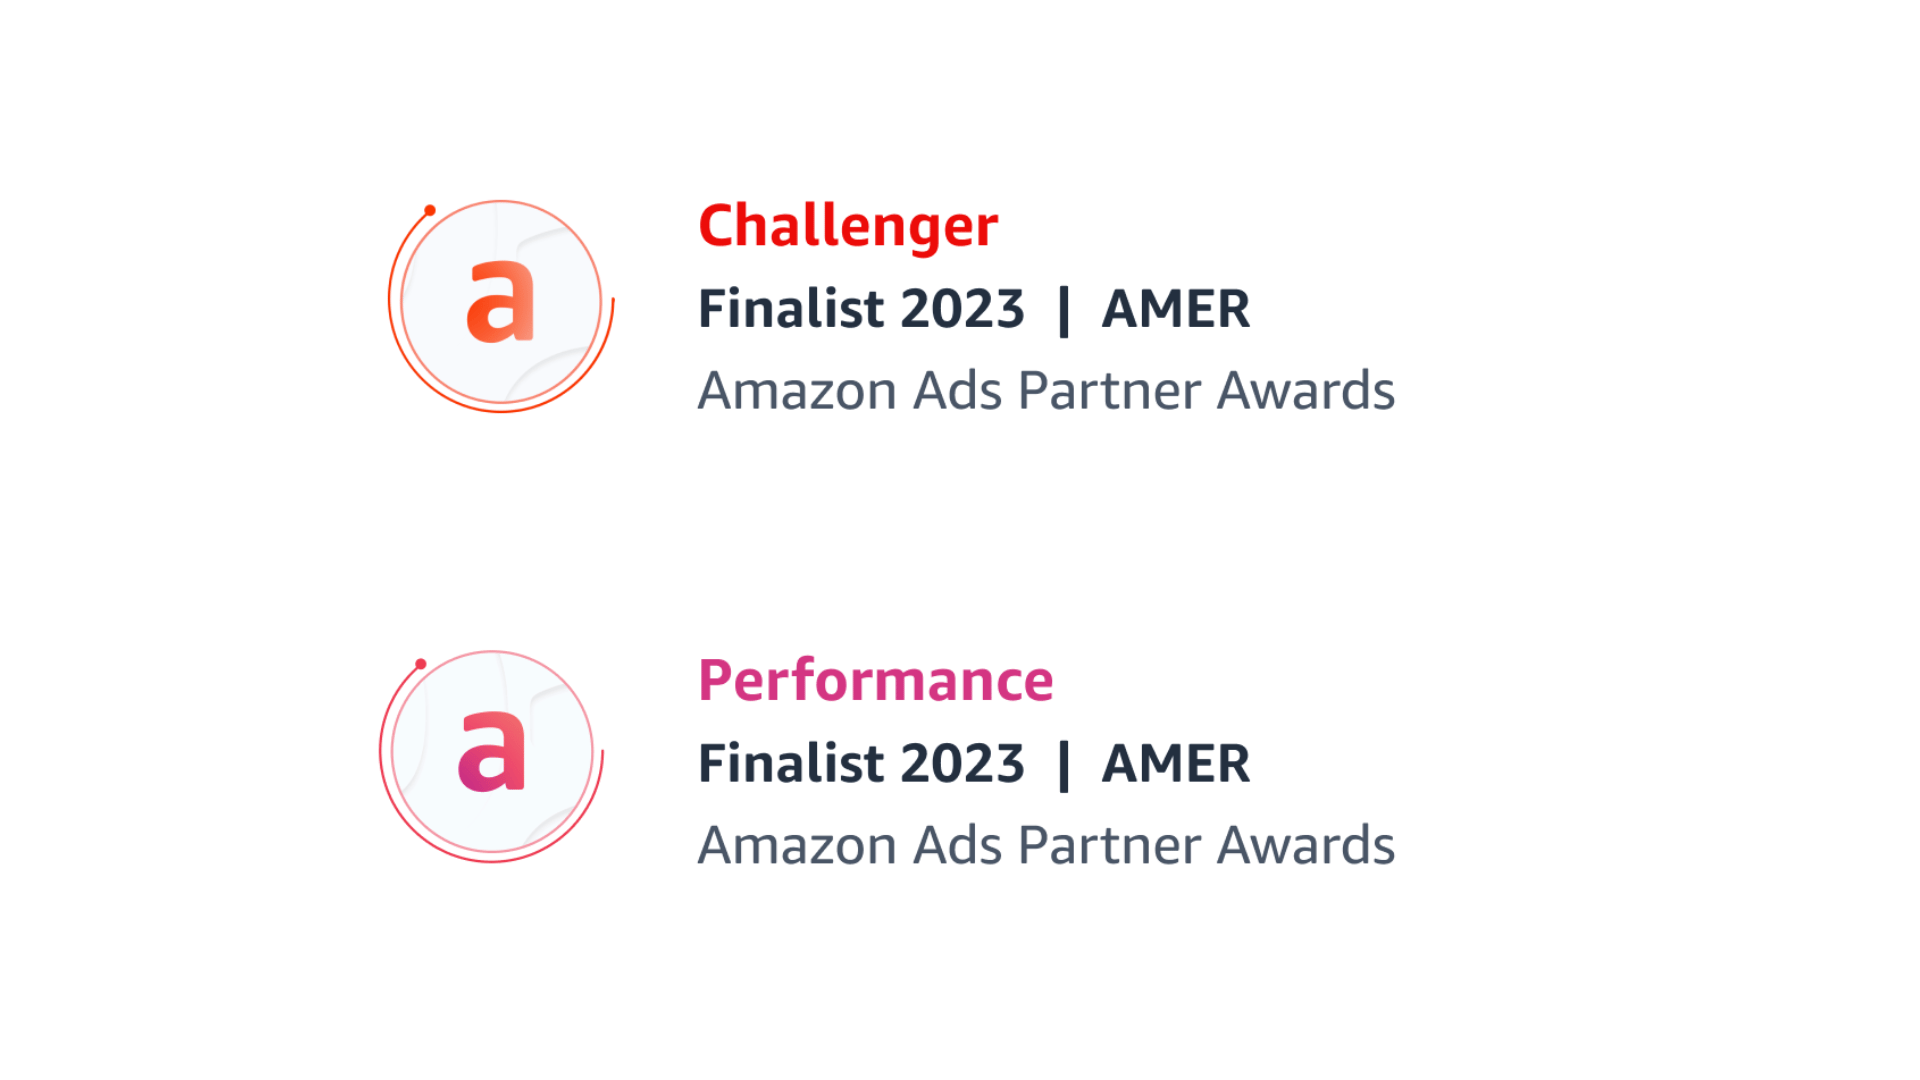 Incrementum Digital as finalist in the 2023 Amazon Ads Partner Awards: the Challenger Award and the Performance Award